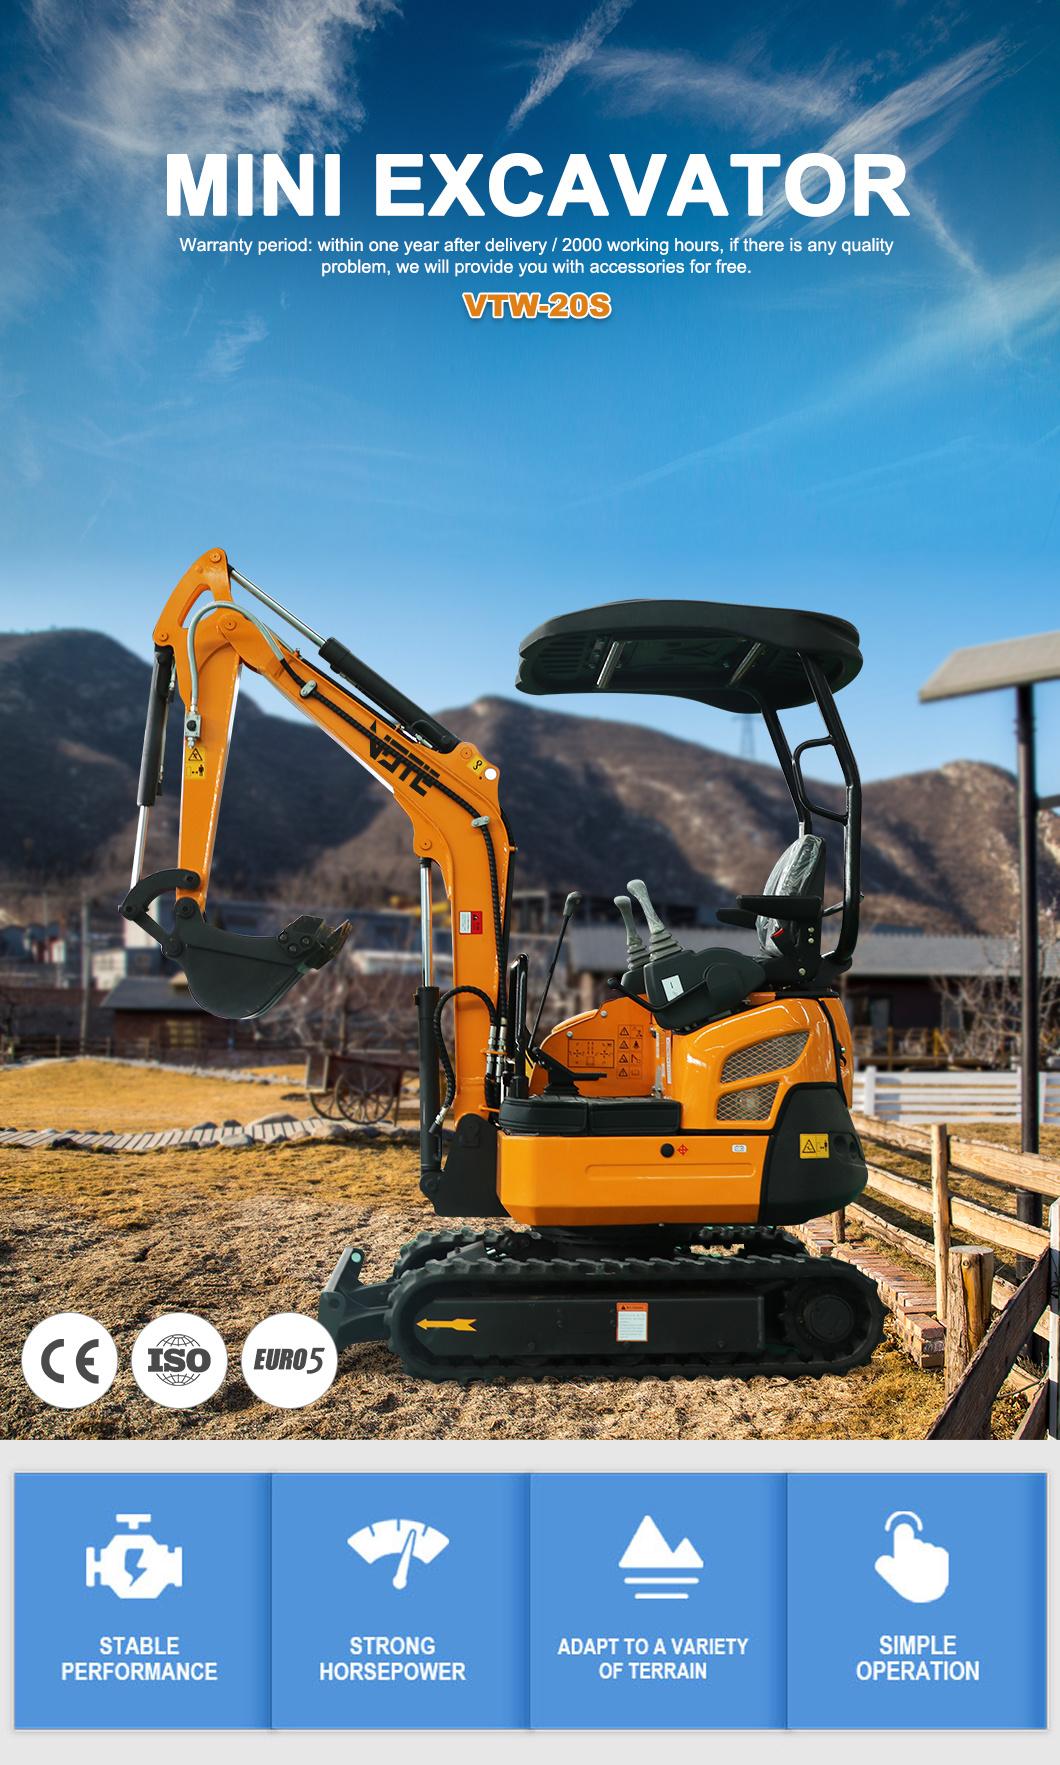 Mini Crawler Excavator 1-3 Ton Digger Small Hydraulic Excavator with CE EPA for Farm Construction Earth Moving Yanmar Engine